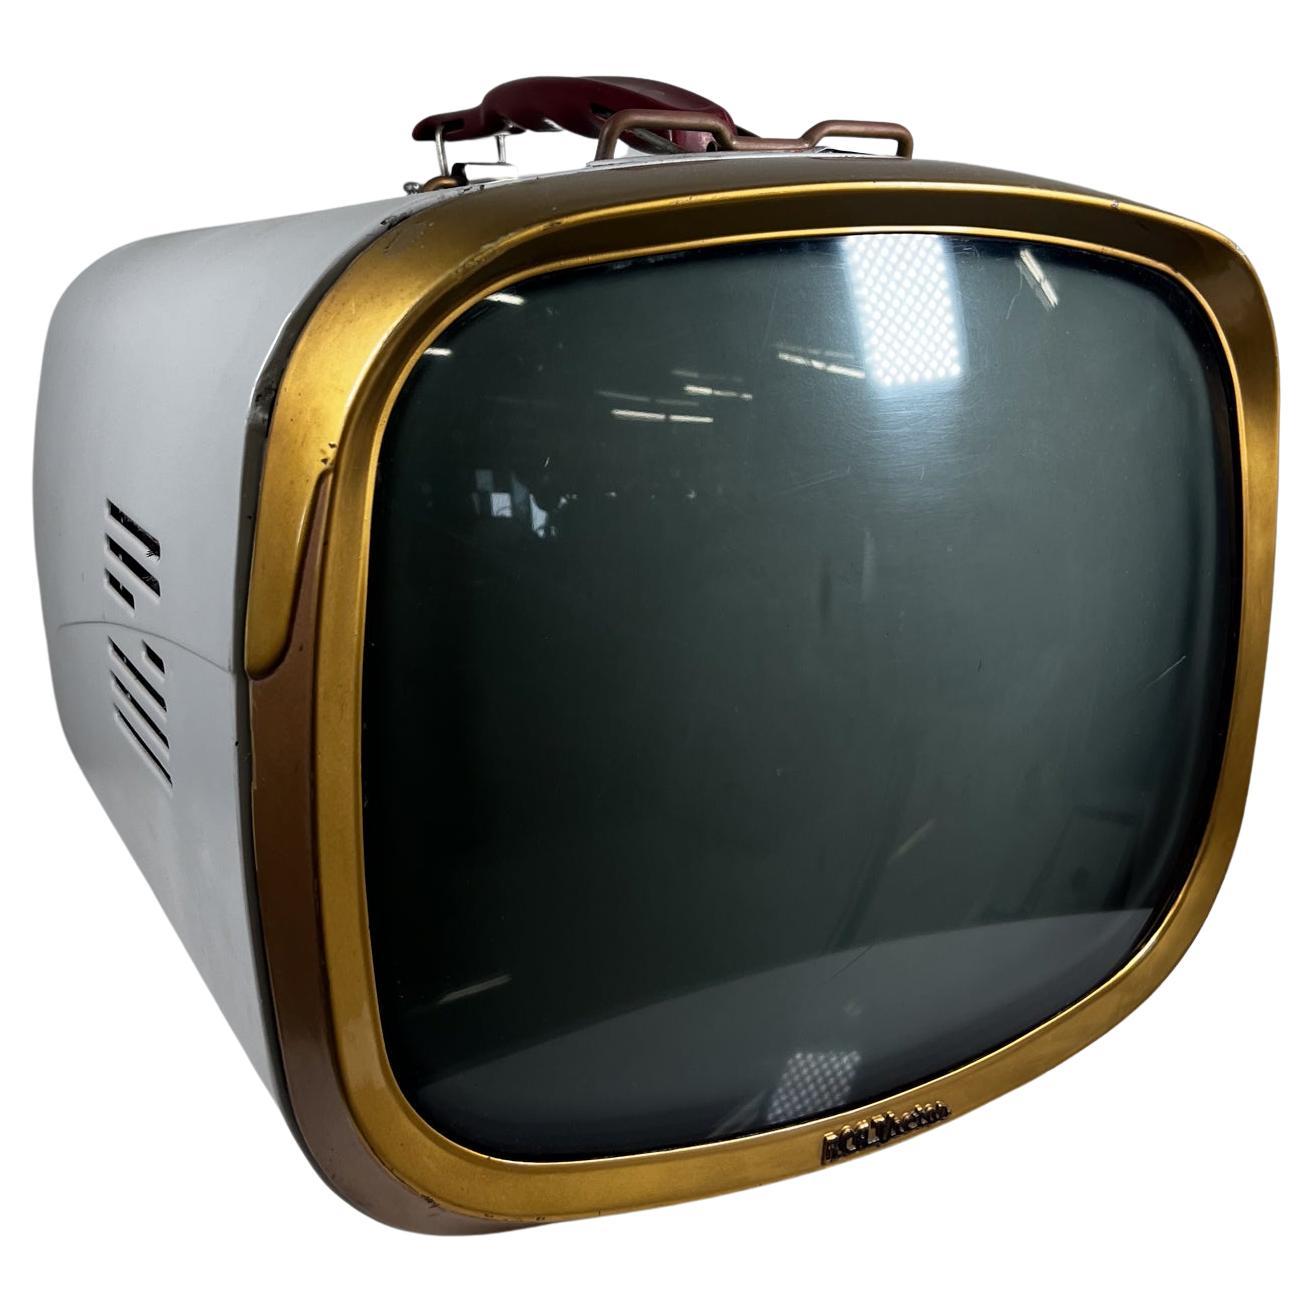 1950s Portable Tube TV Deluxe RCA Victor Television New Jersey